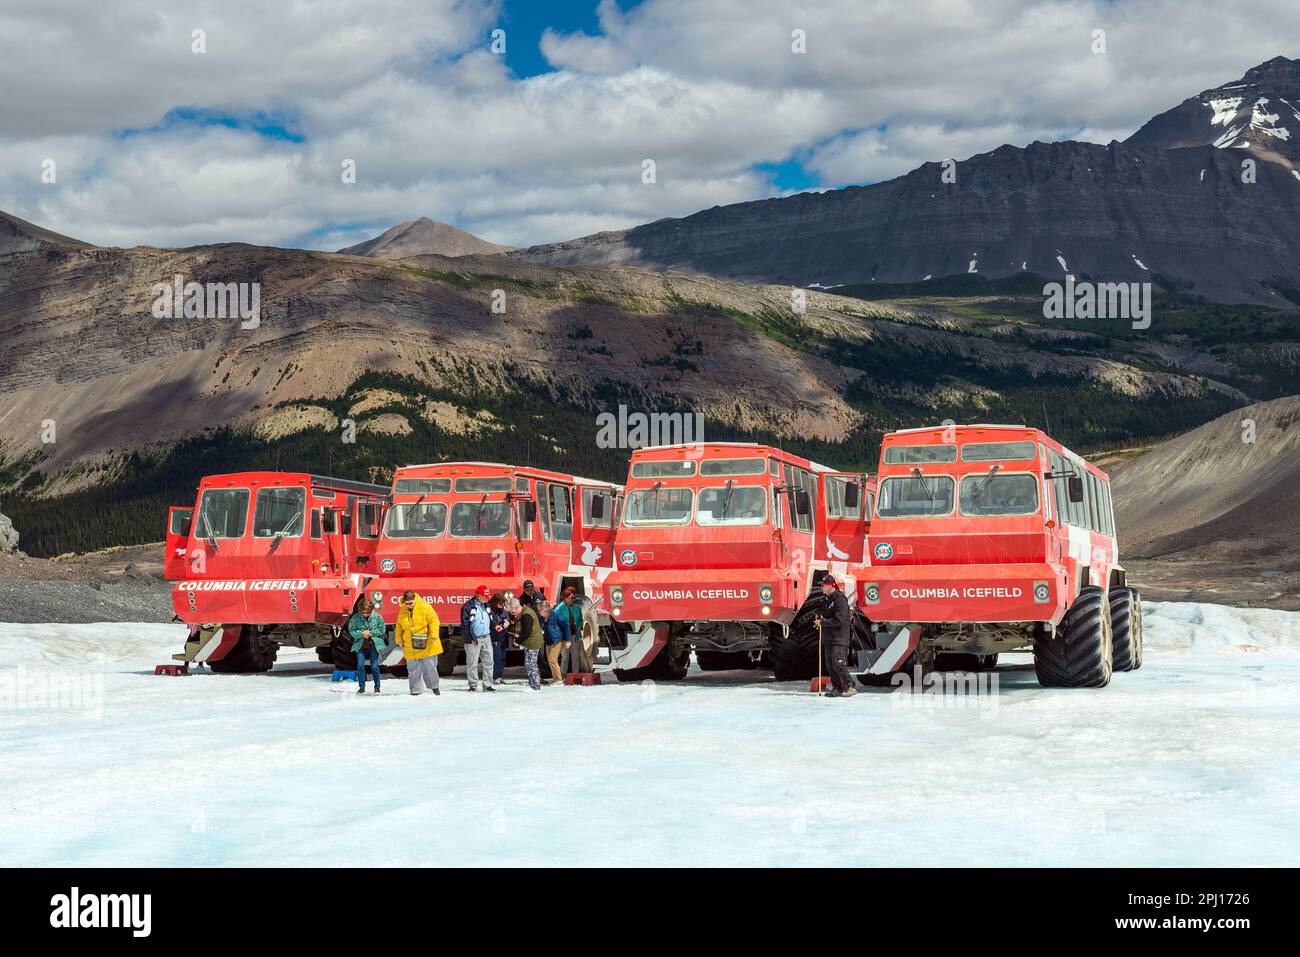 Giant Columbia Icefield trucks and tourists on ice of Athabasca glacier, Jasper national park, Canada. Stock Photo